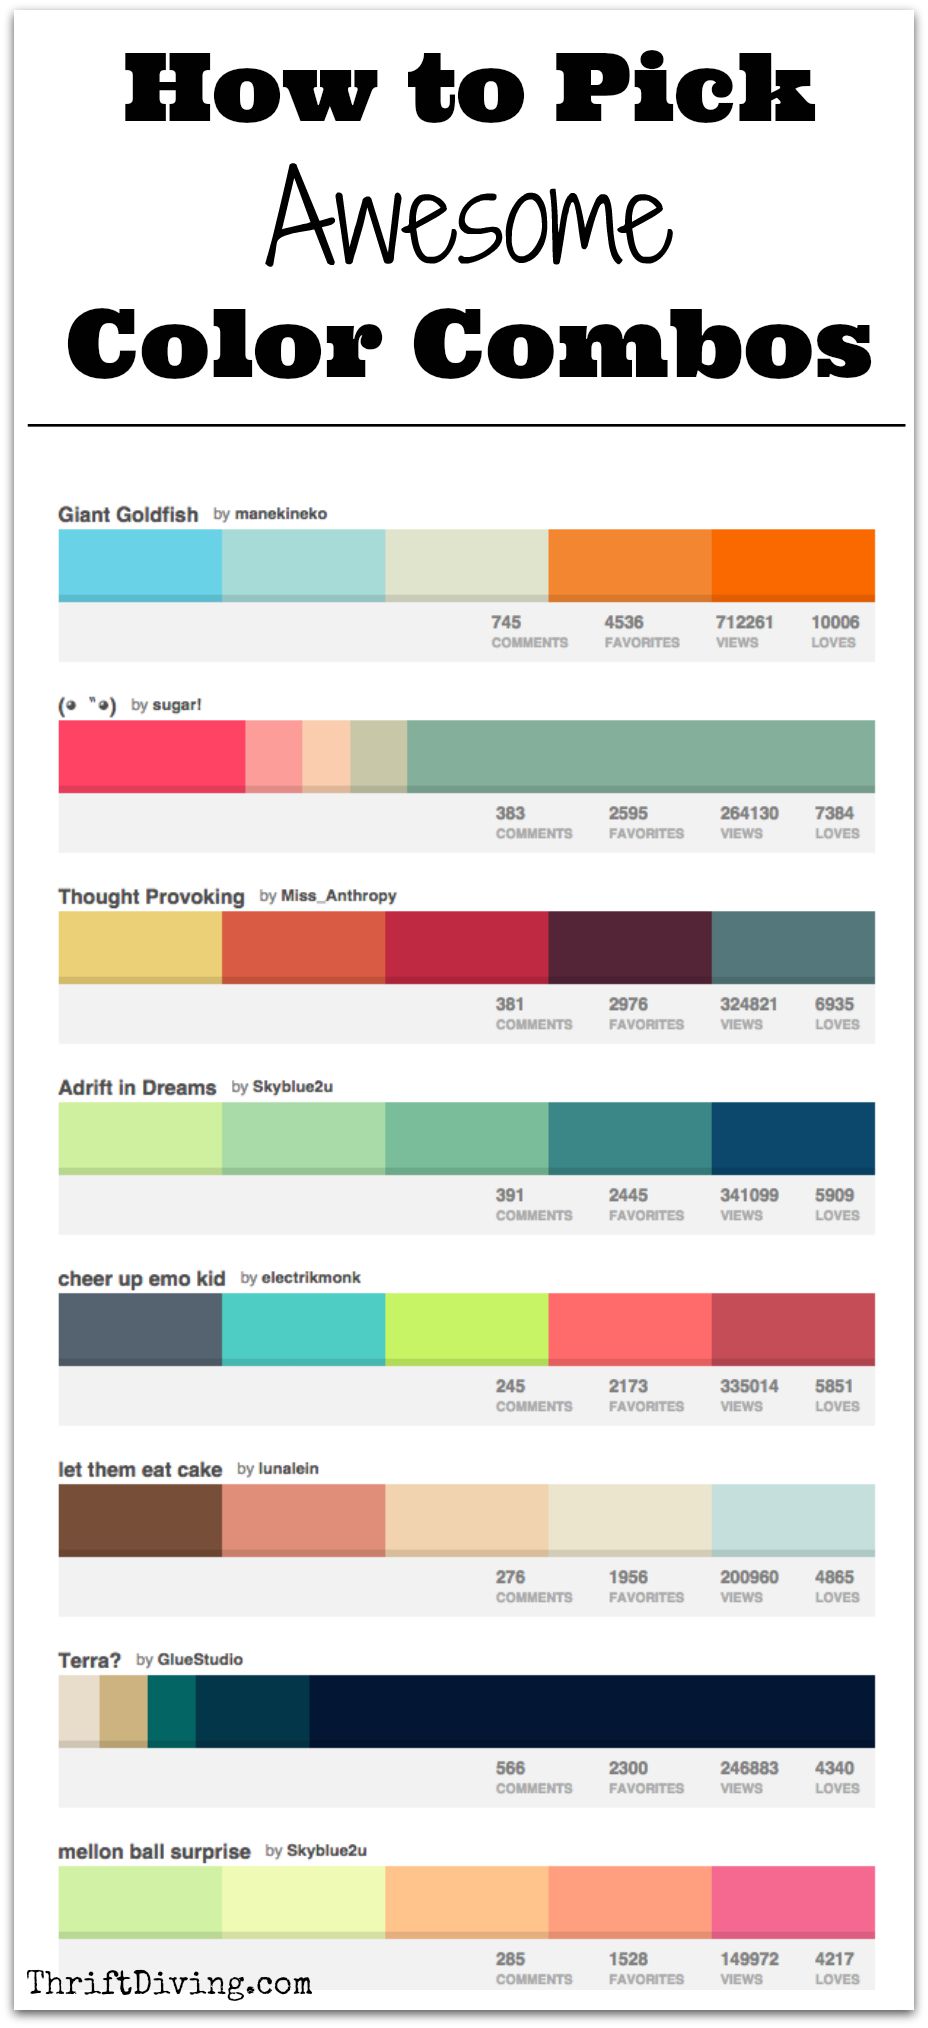 How to Pick Awesome Color Combos